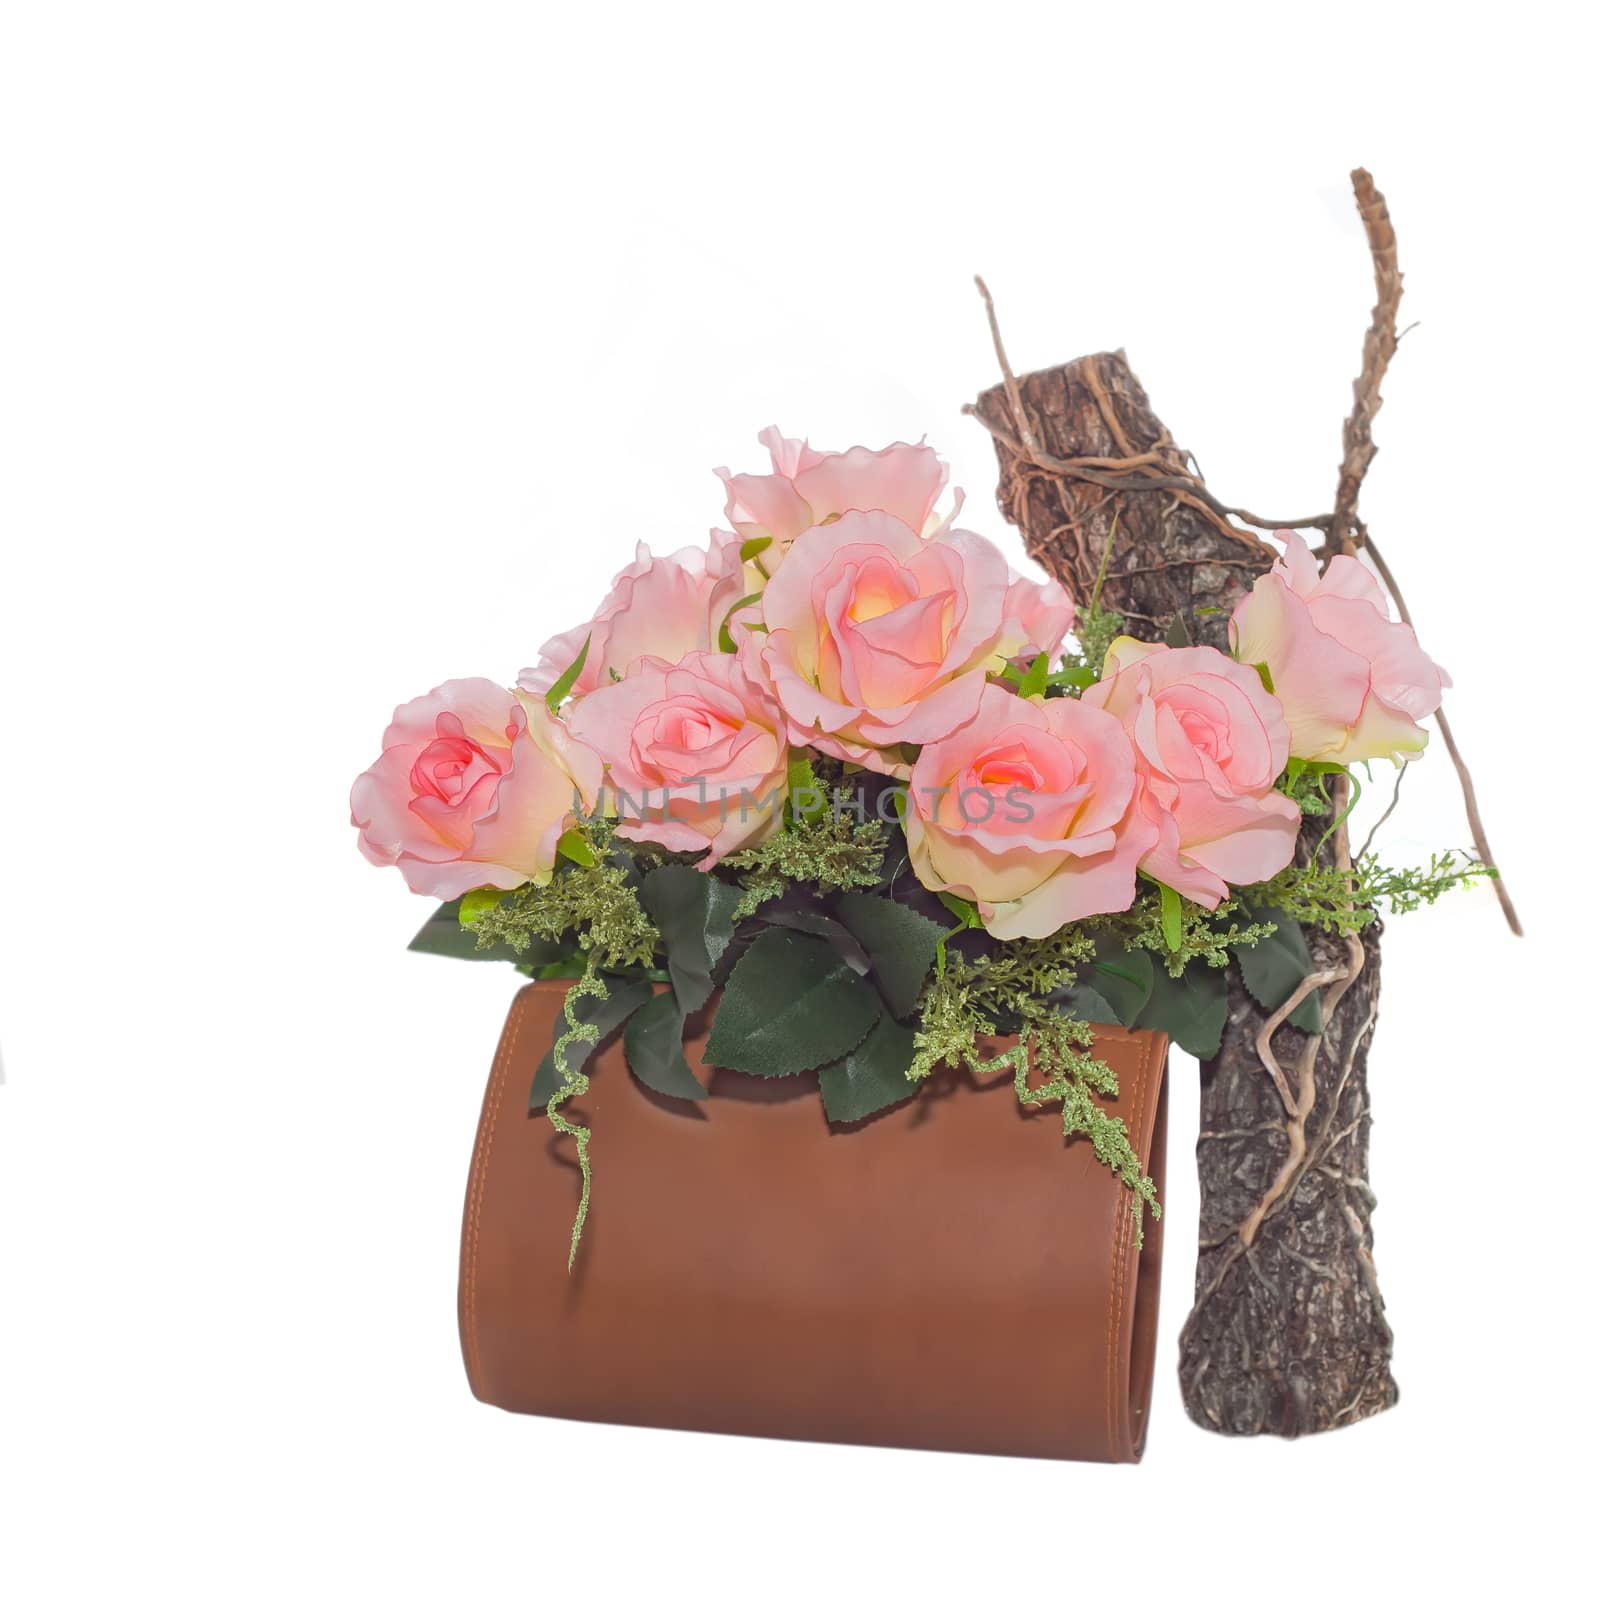 flowers in leather bag on white background
